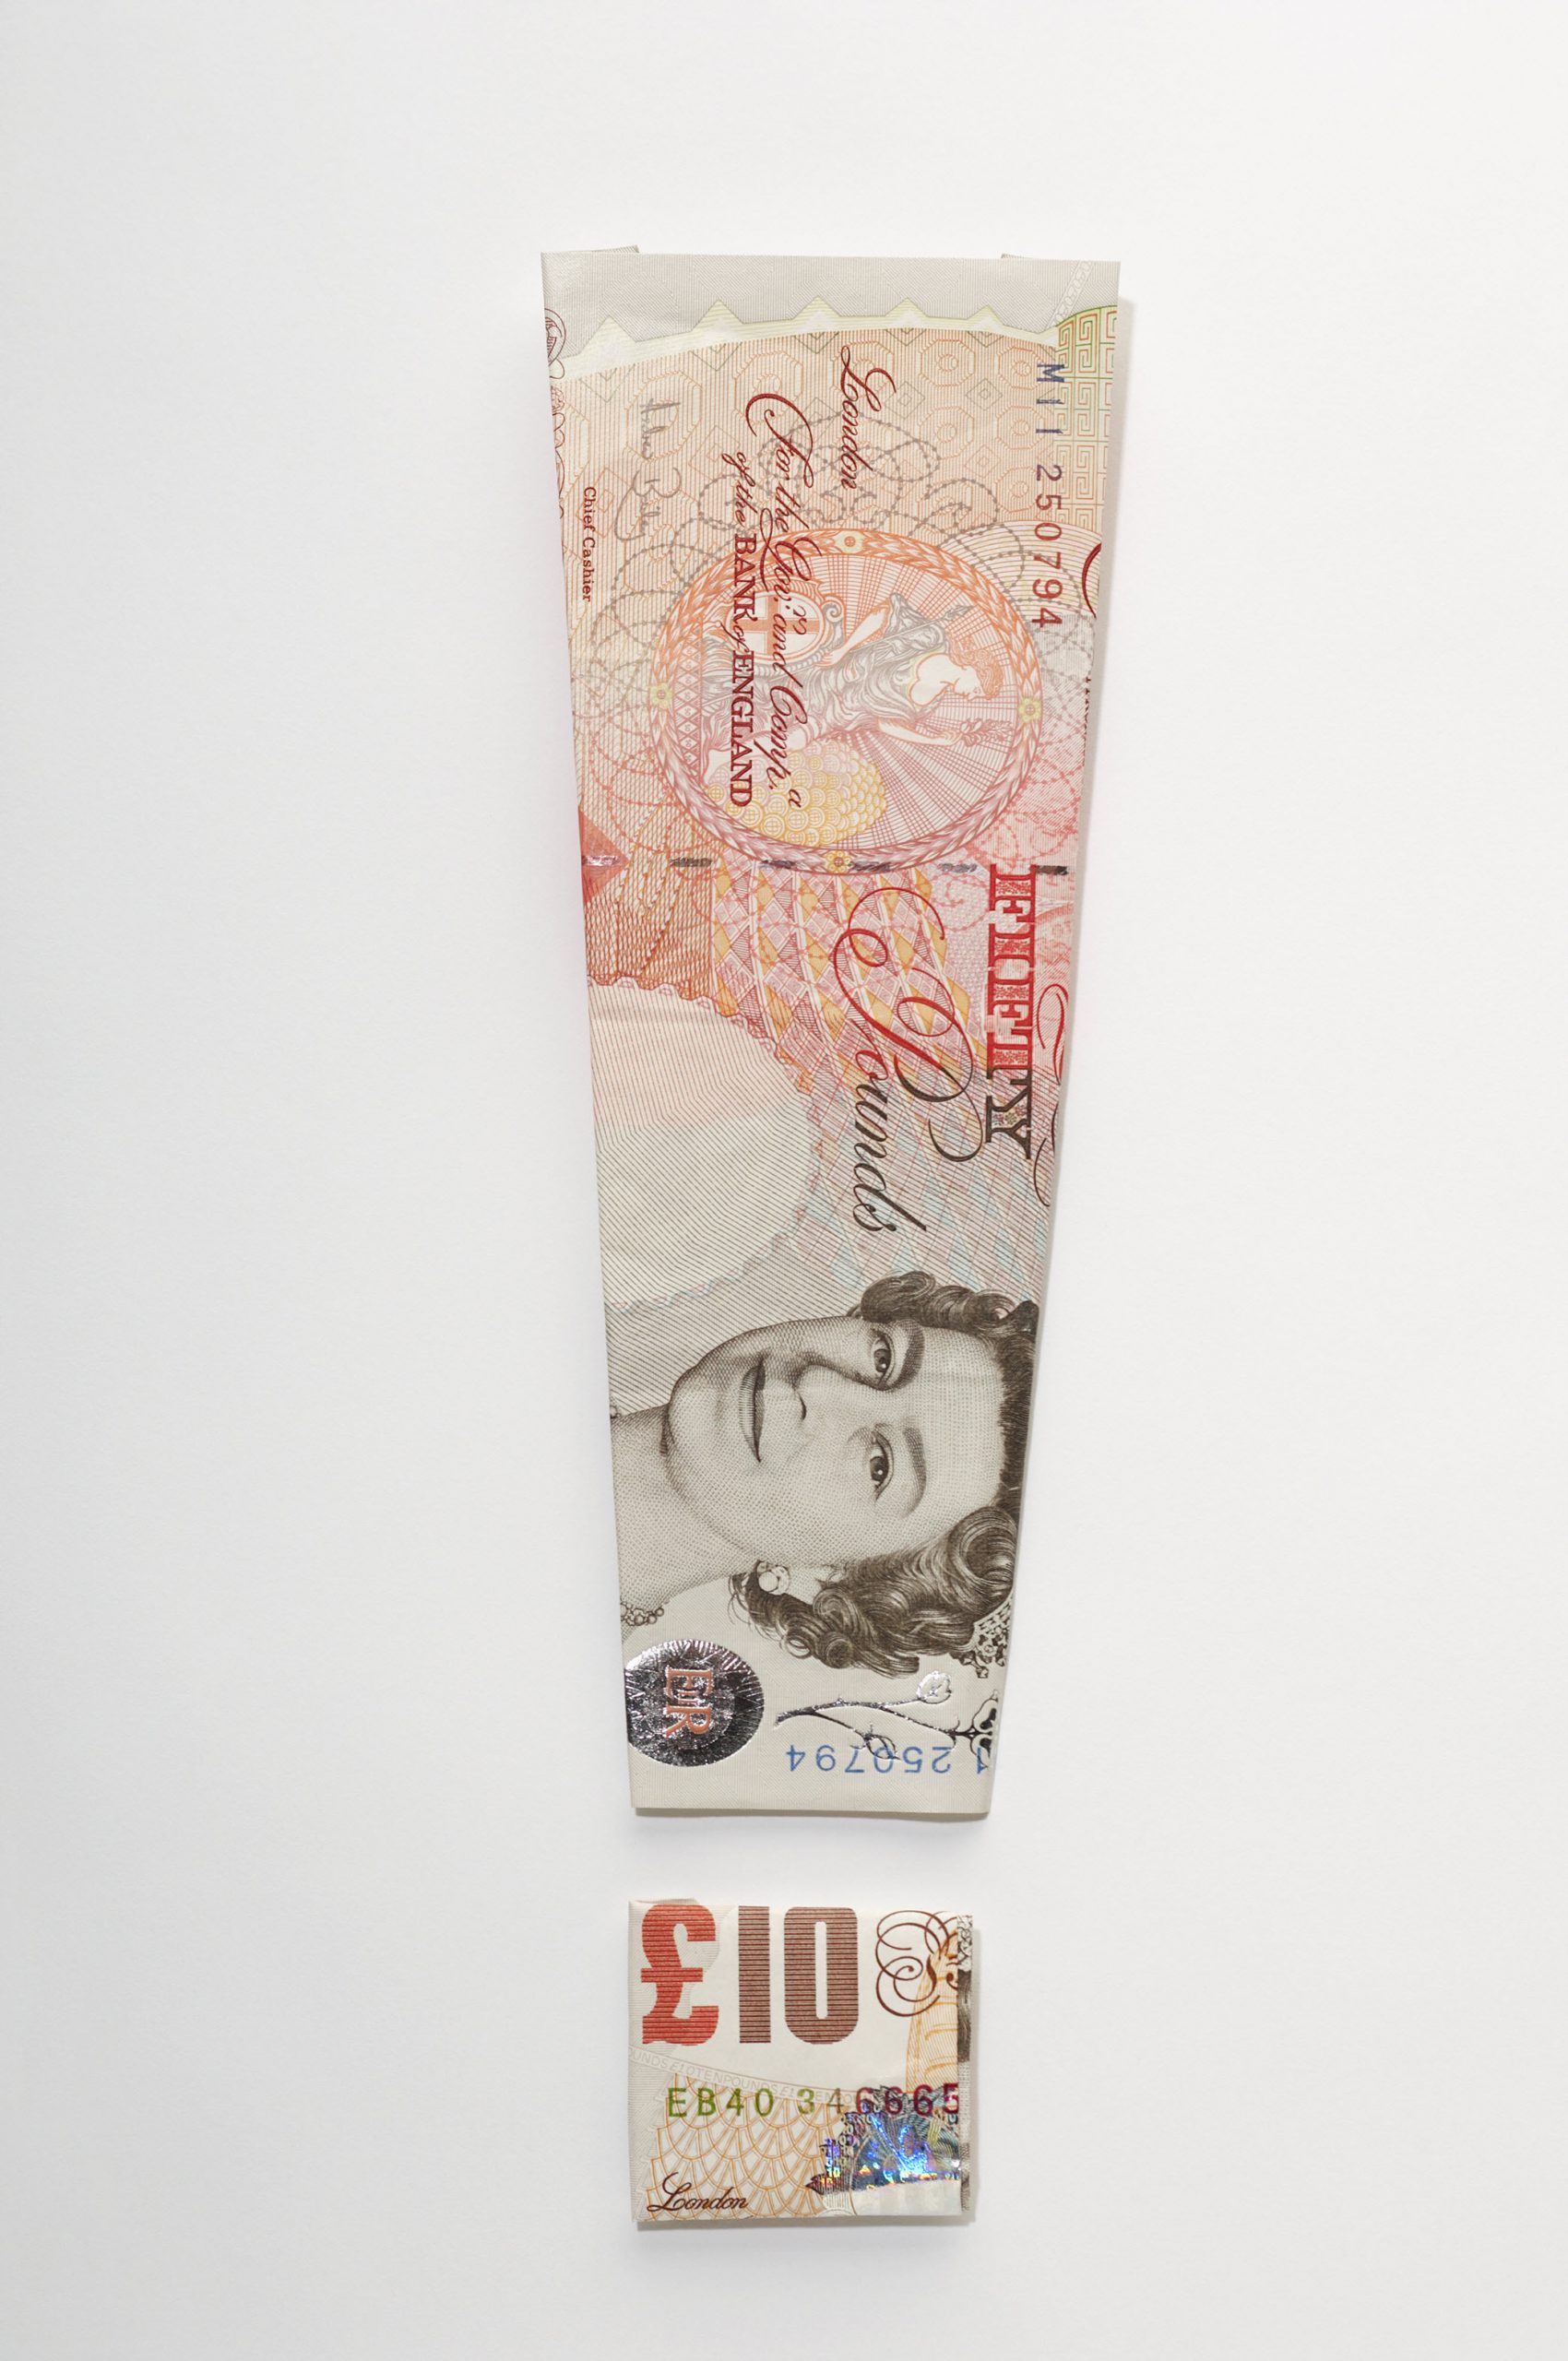 Exclamation mark symbol made of folded banknotes